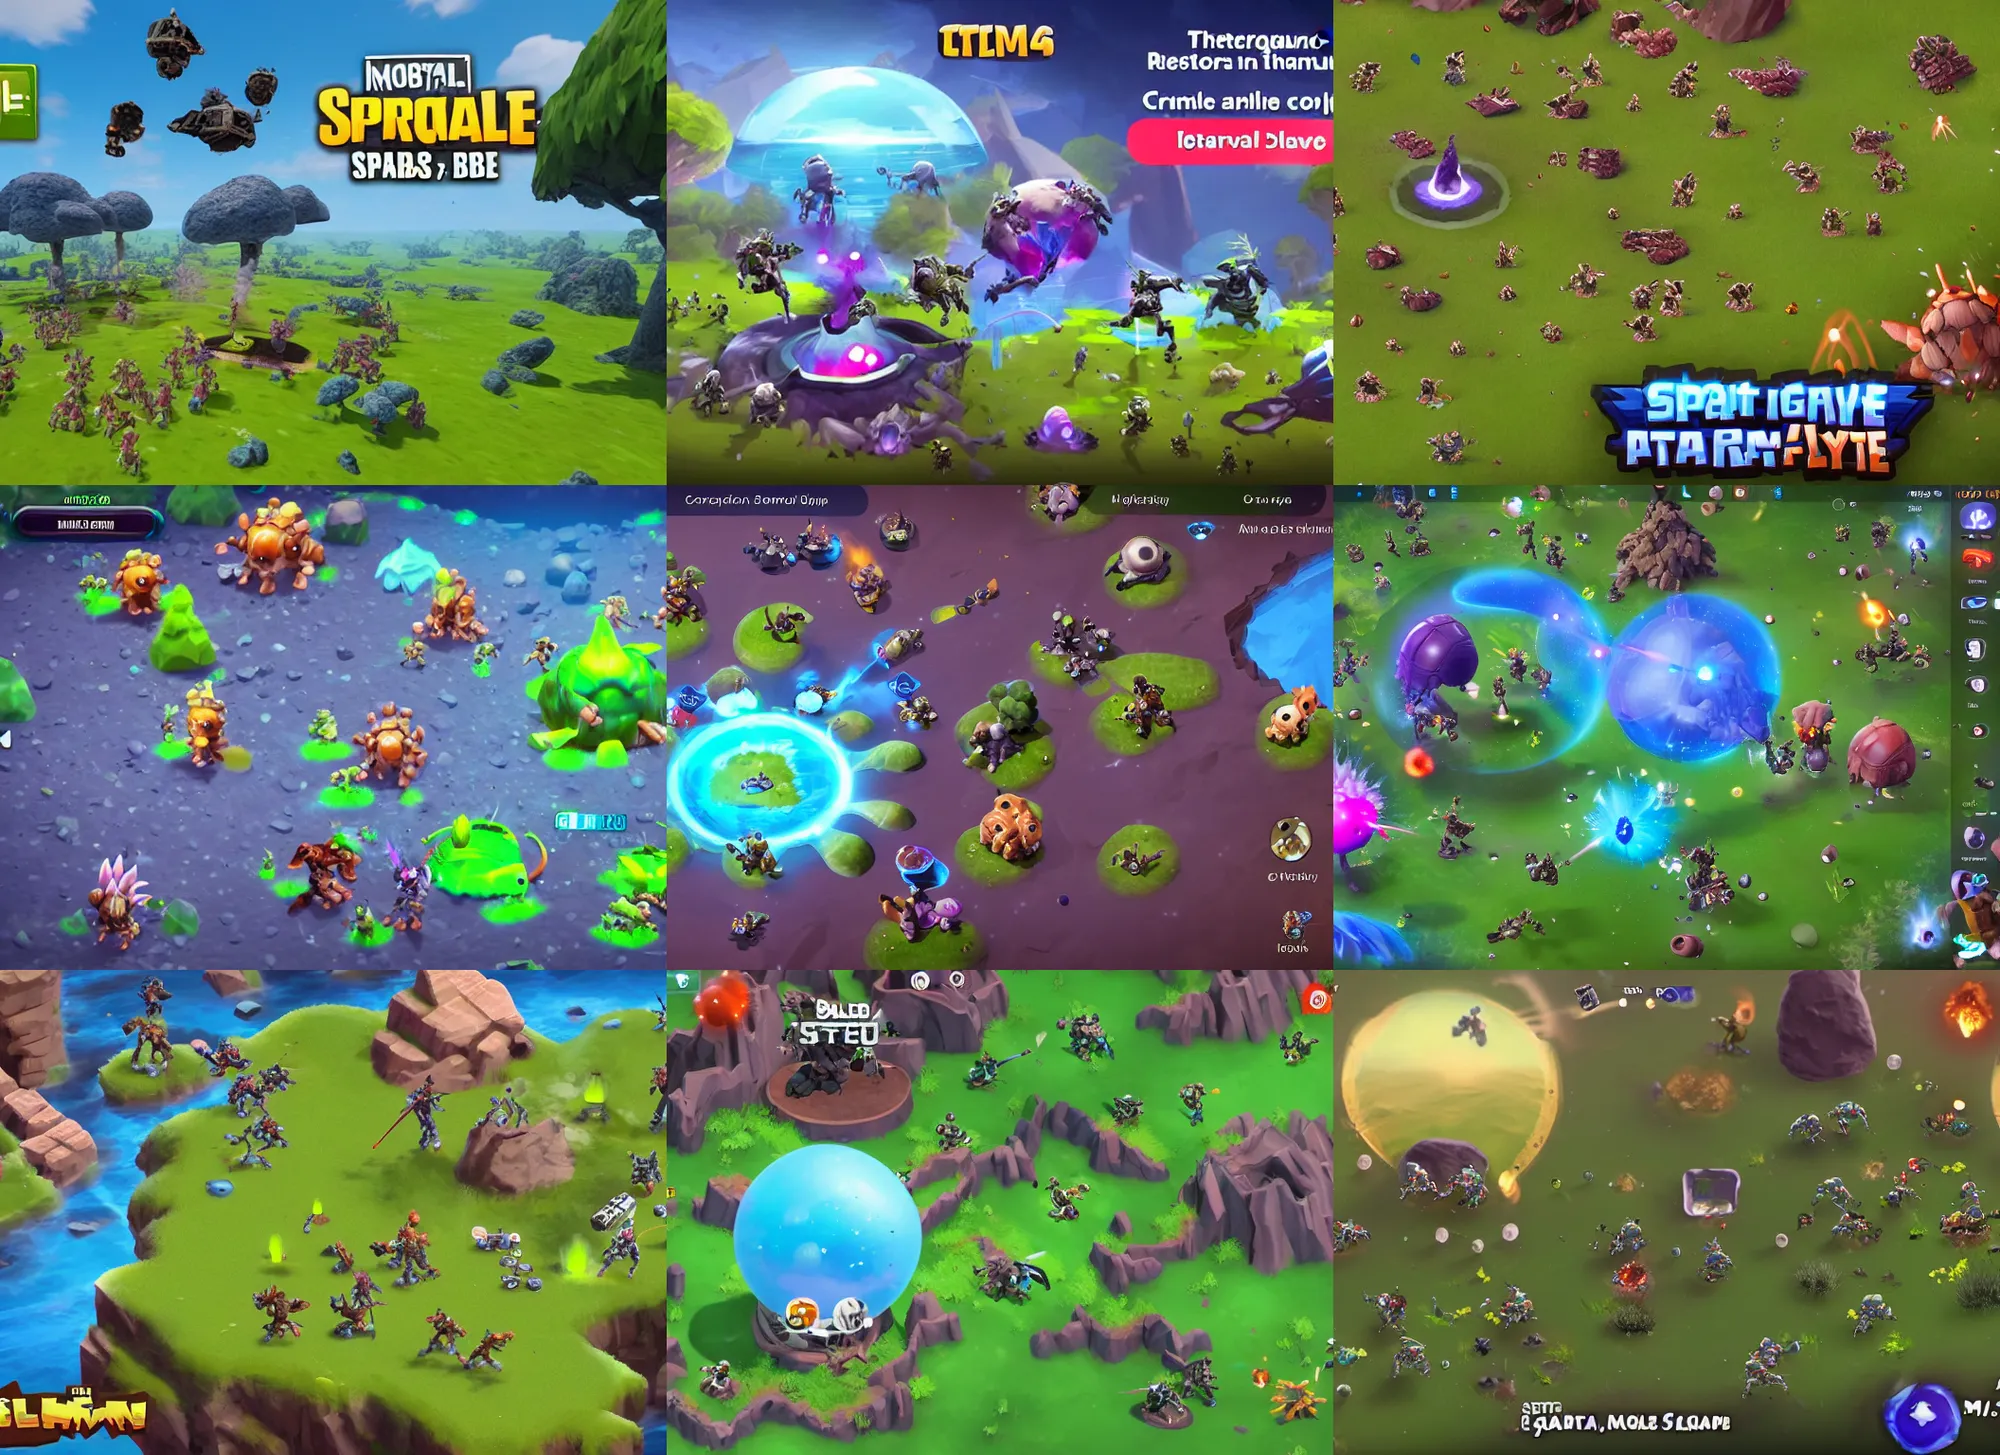 Prompt: epic fight between last two squads in mobile battle royale game about cute alien little animals that landed on a planet with different biomes, craters, alien capsules, bushes in the visual style of Spore and Eternal Cylinder, world curvature, game overlay, hp mp stamina bars, 3rd person camera